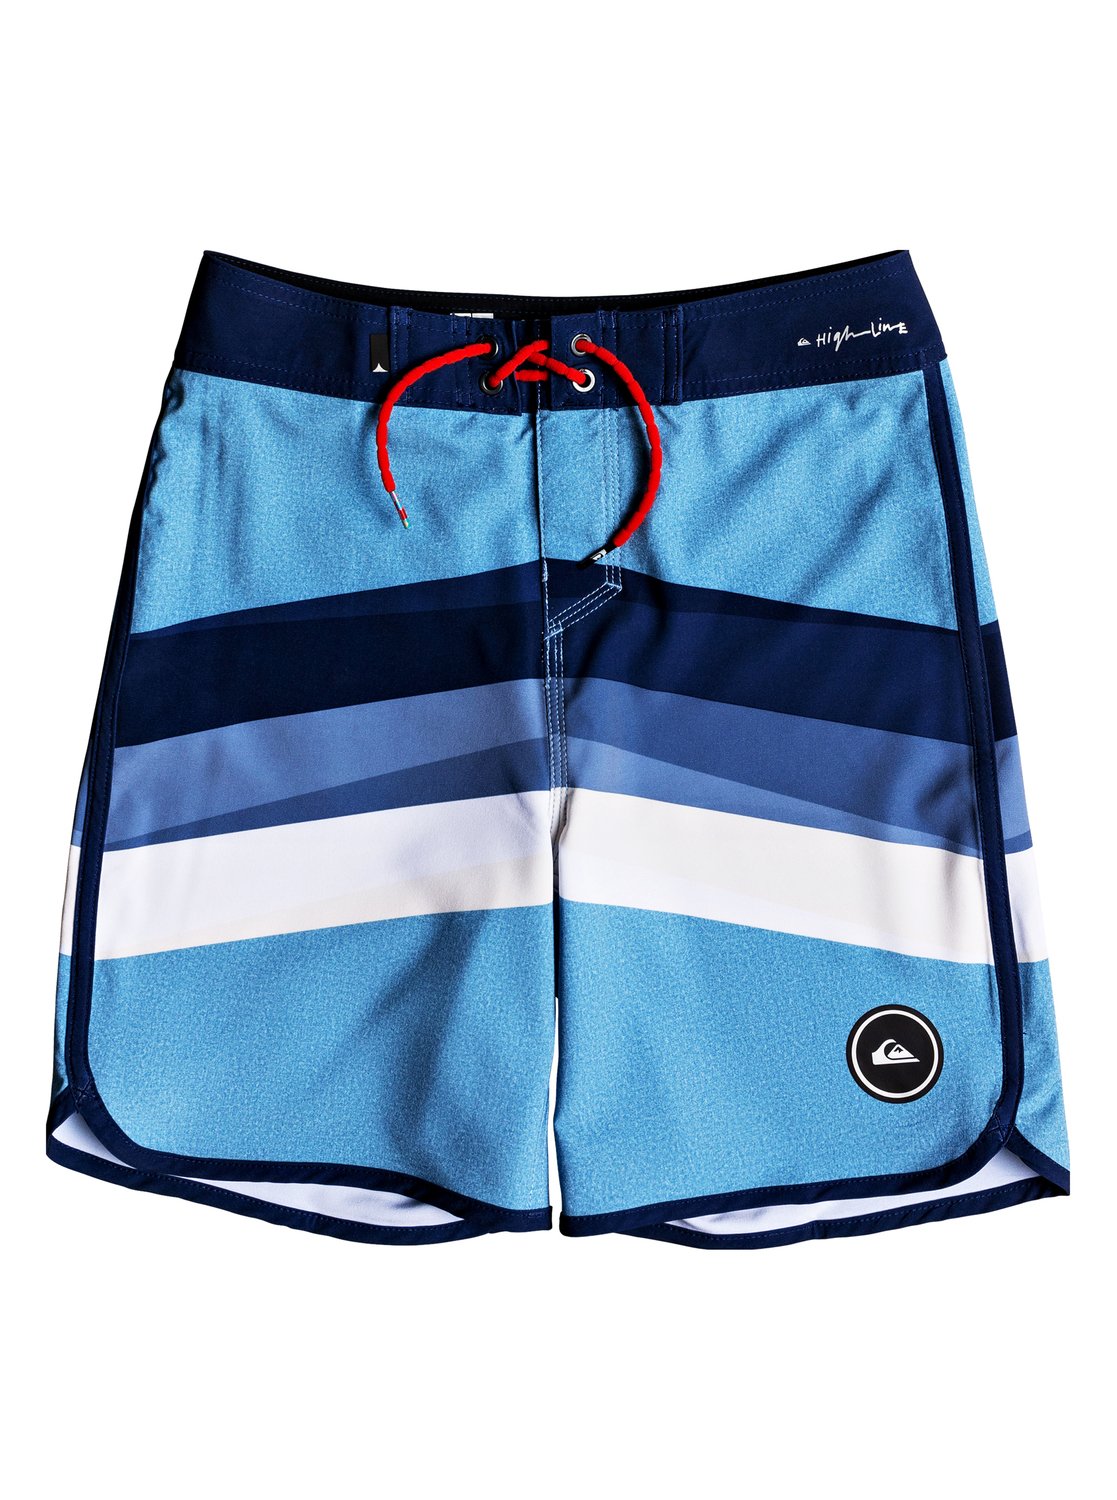 Quiksilver Highline Reverse Youth Boardshort BNG6 25/10